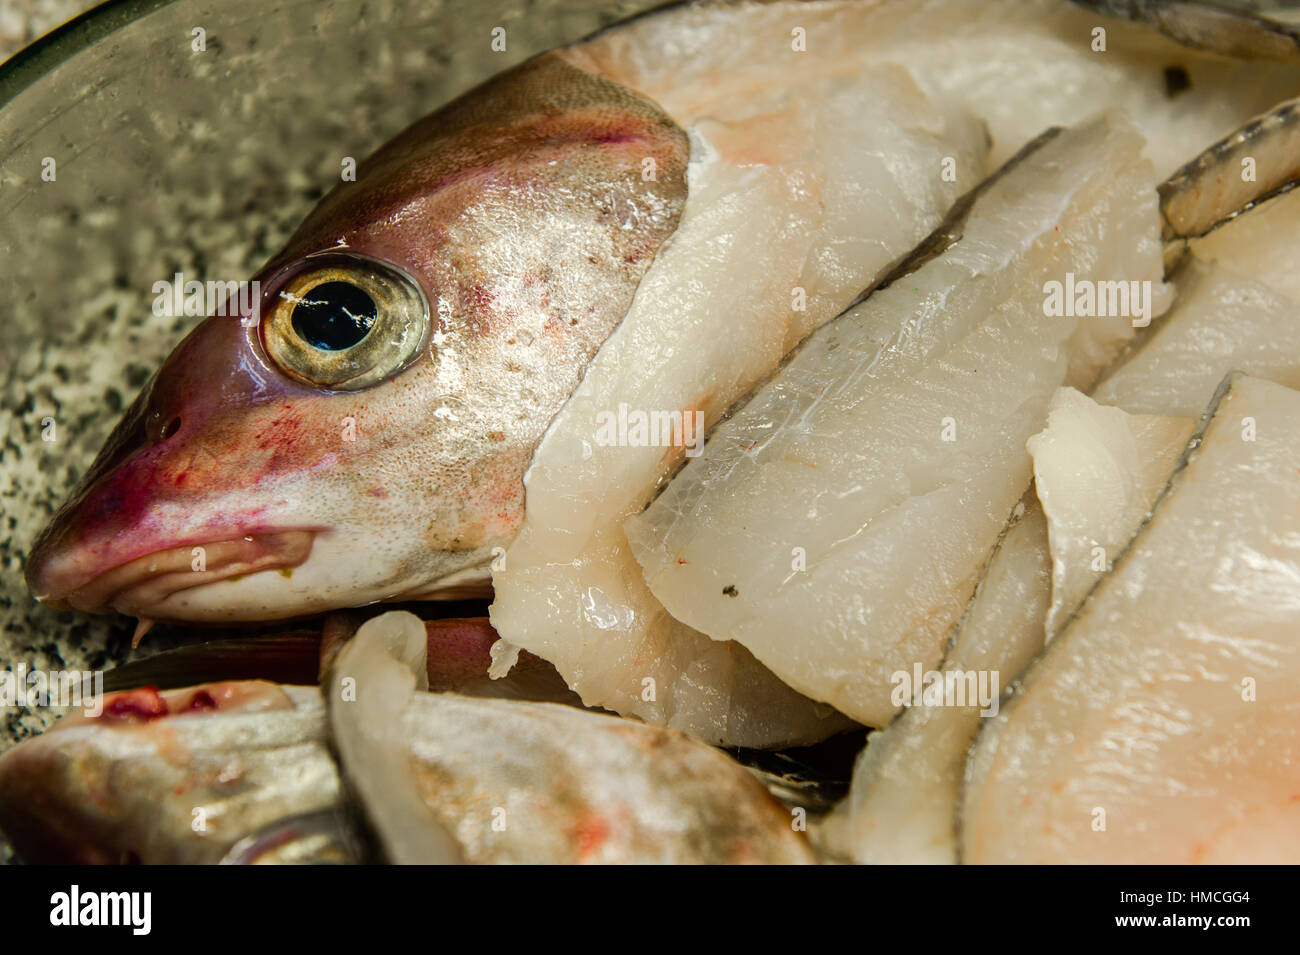 Haddock's head and fillets in a dish in a domestic kitchen. Stock Photo